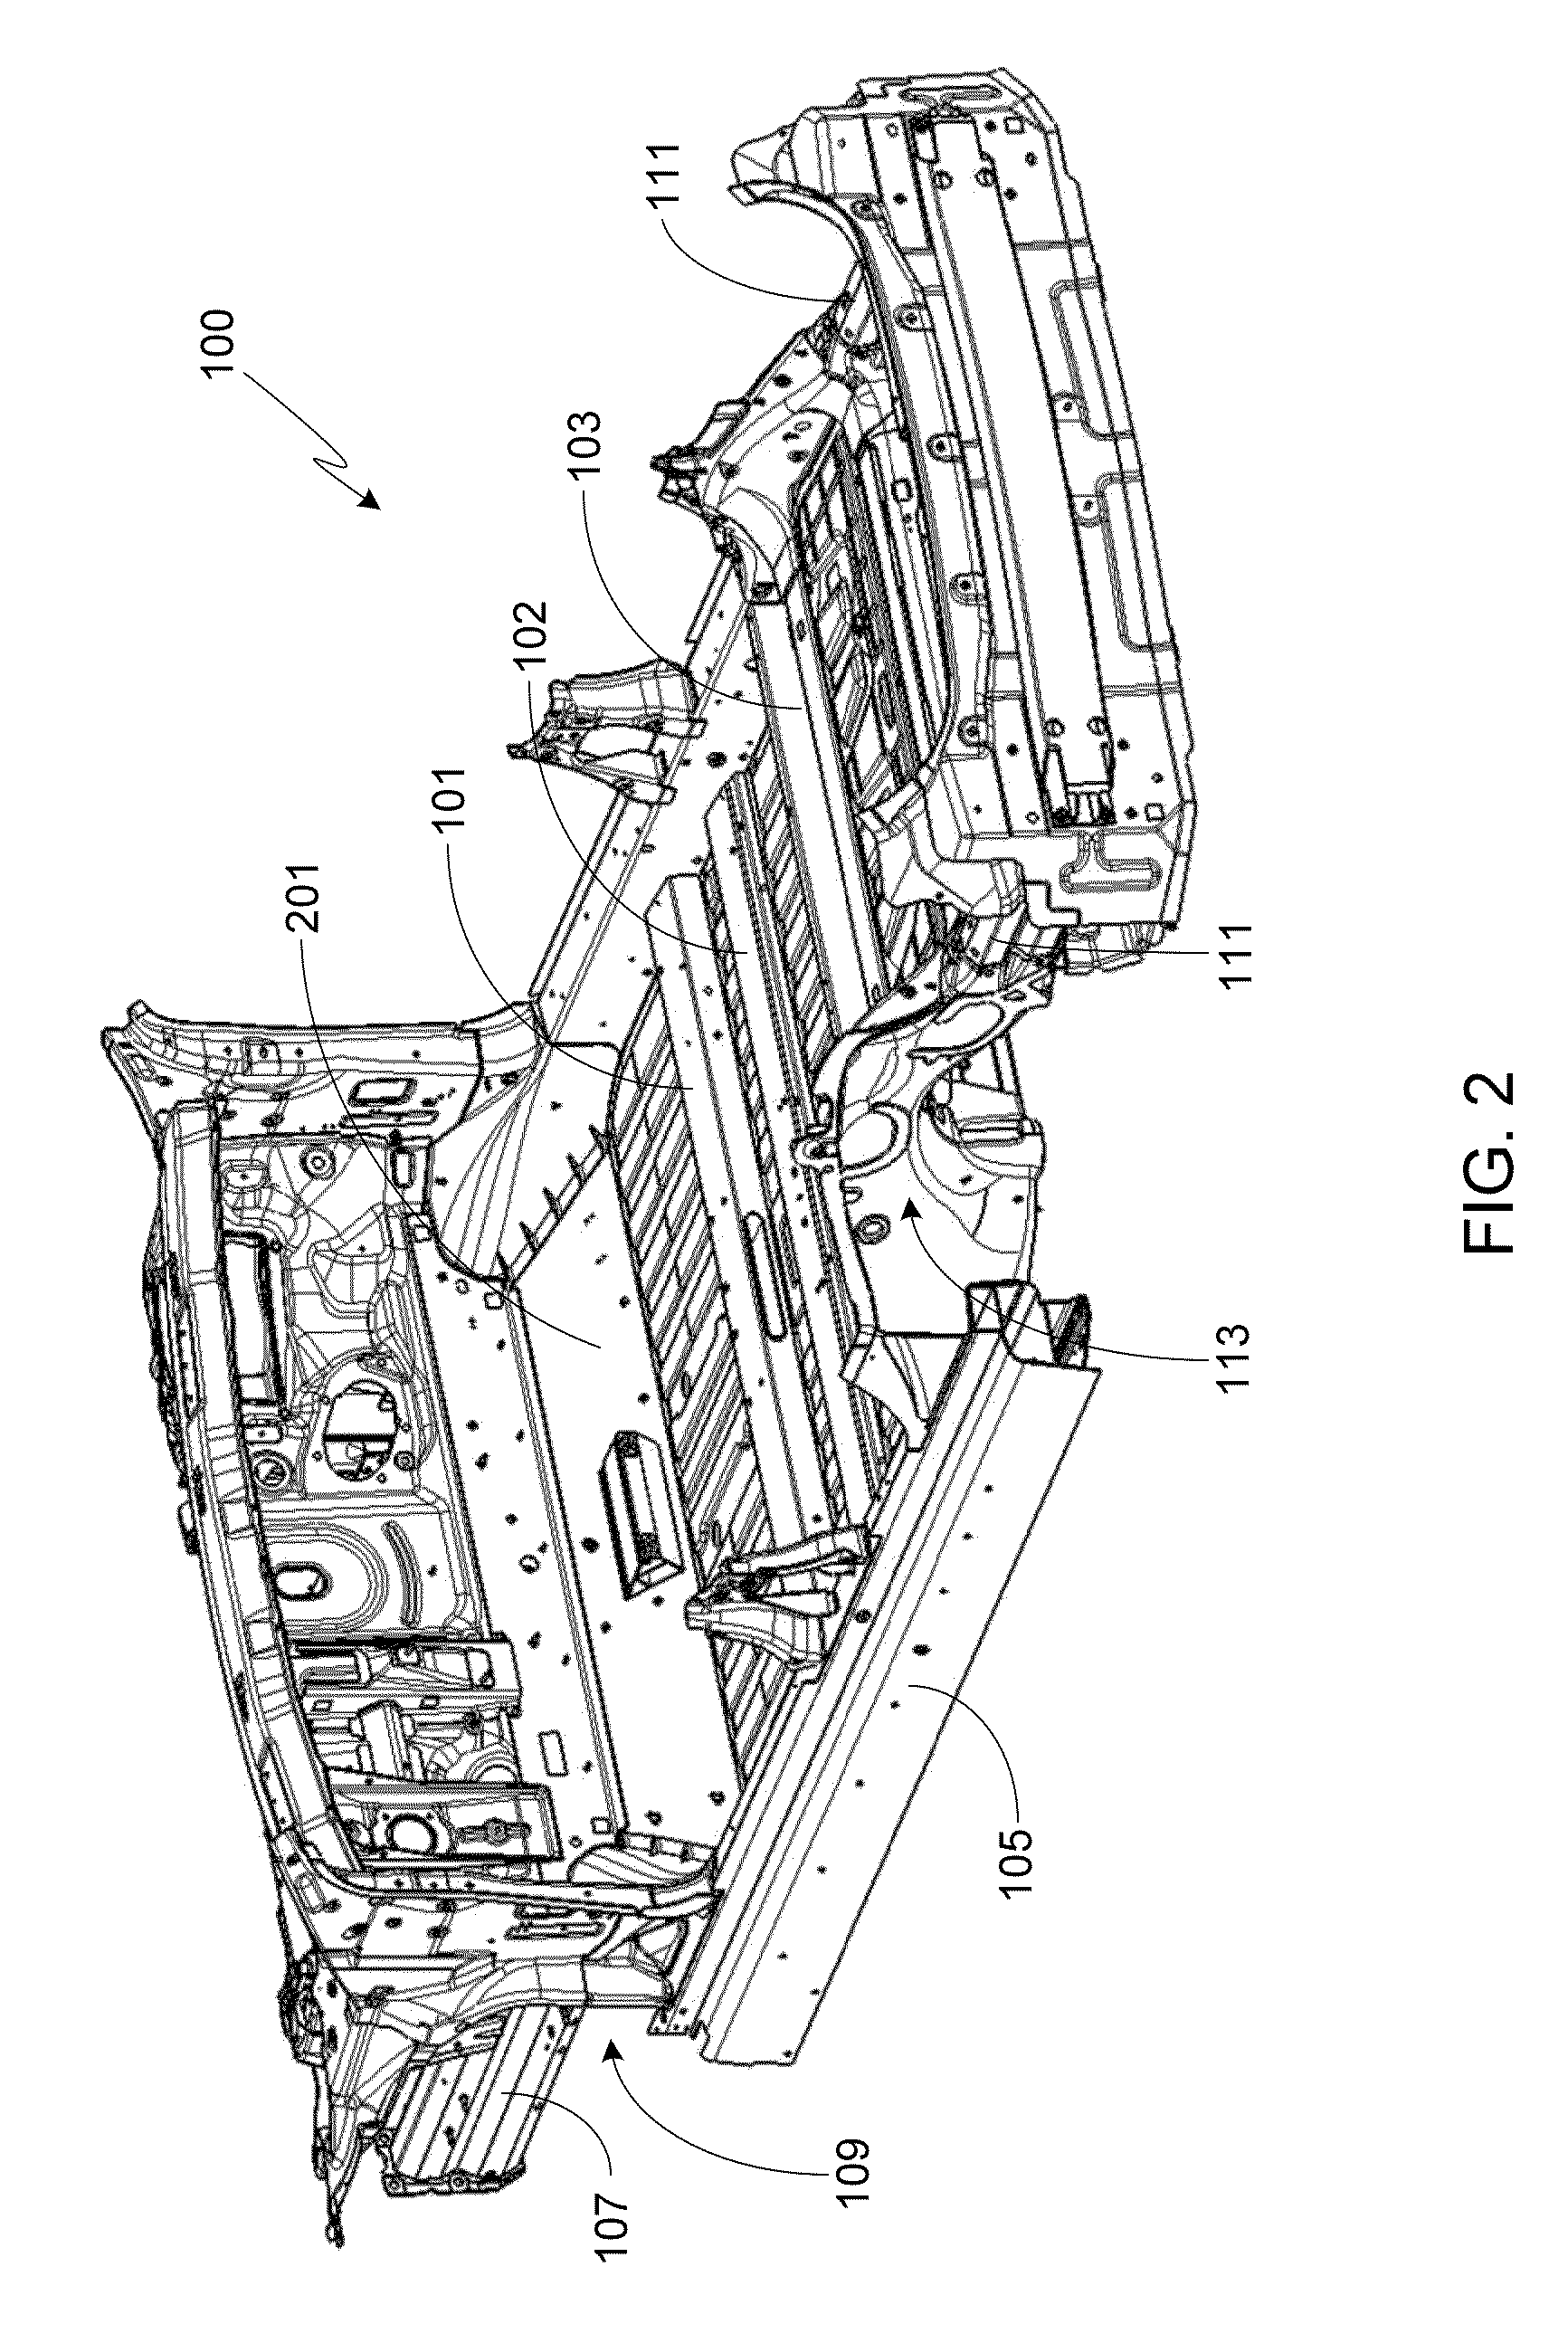 System for absorbing and distributing side impact energy utilizing a side sill assembly with a collapsible sill insert